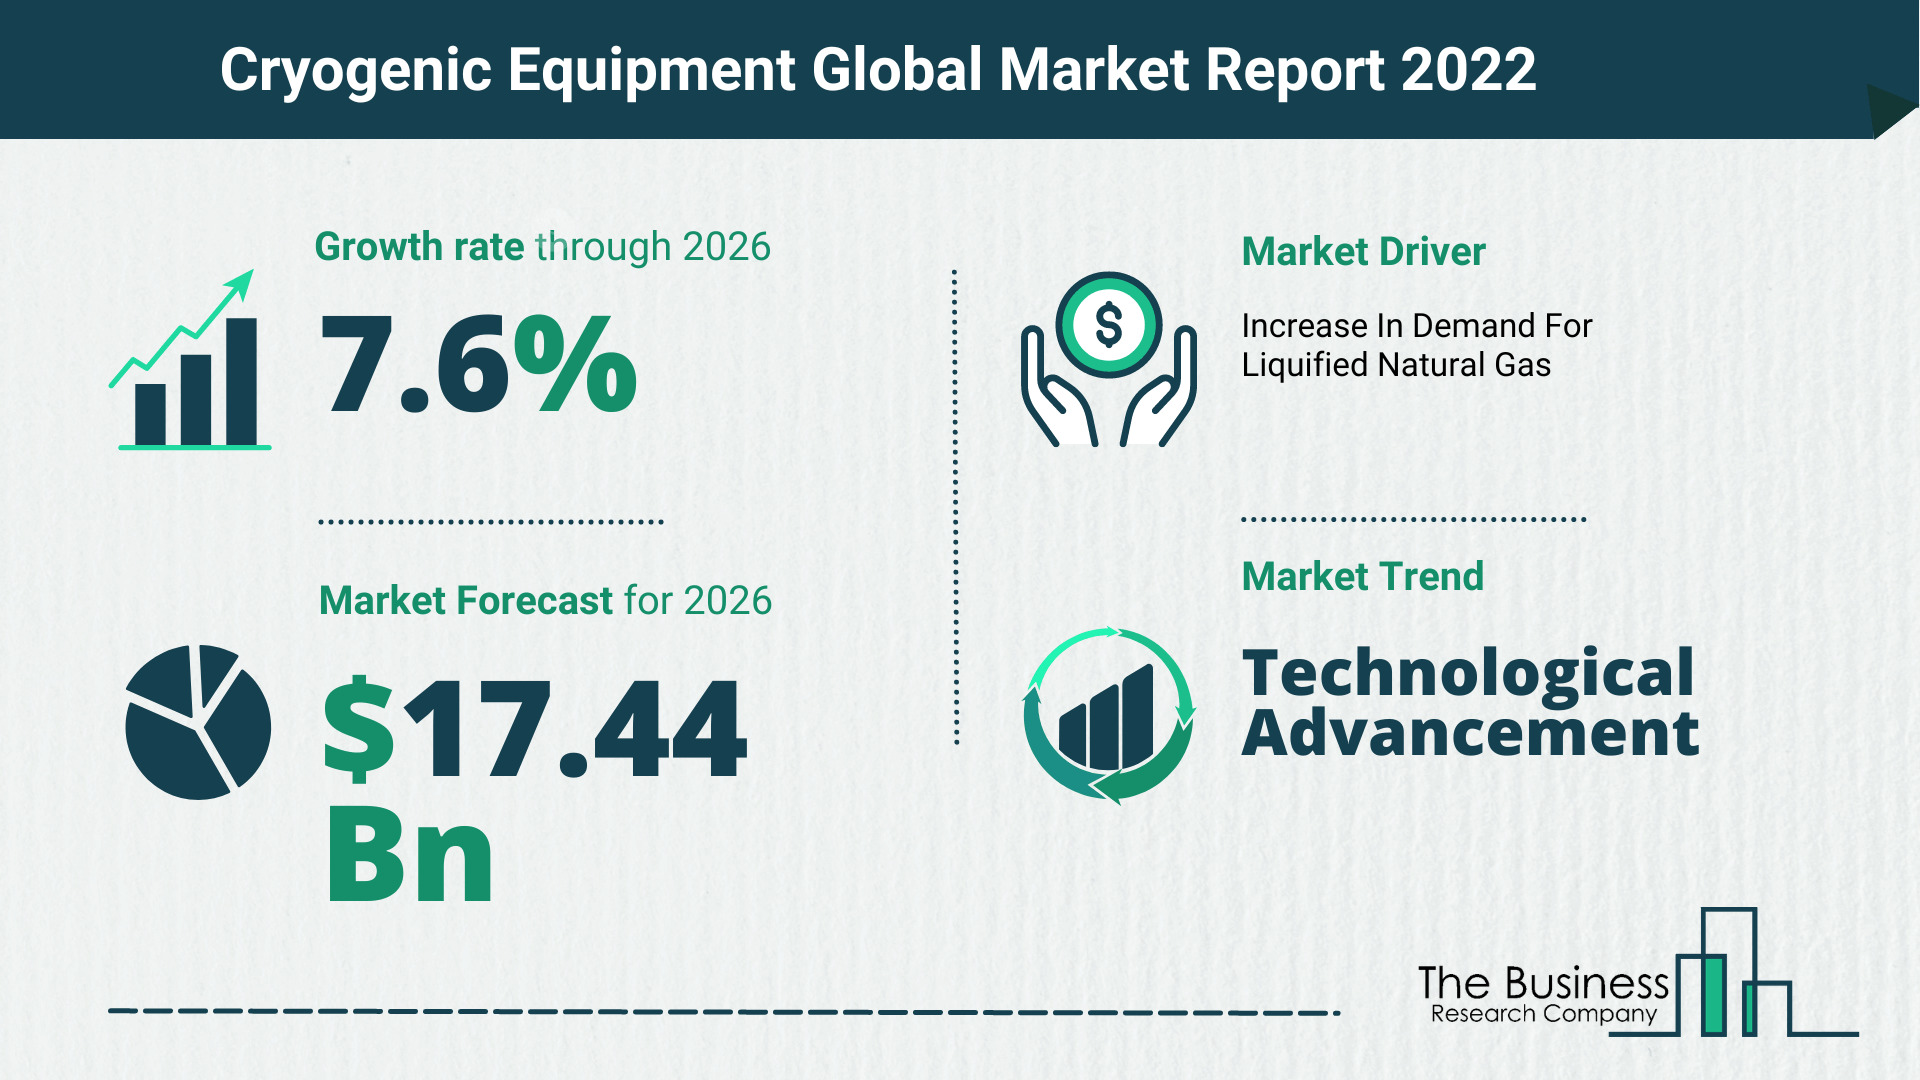 Latest Cryogenic Equipment Market Growth Study 2022-2026 By The Business Research Company